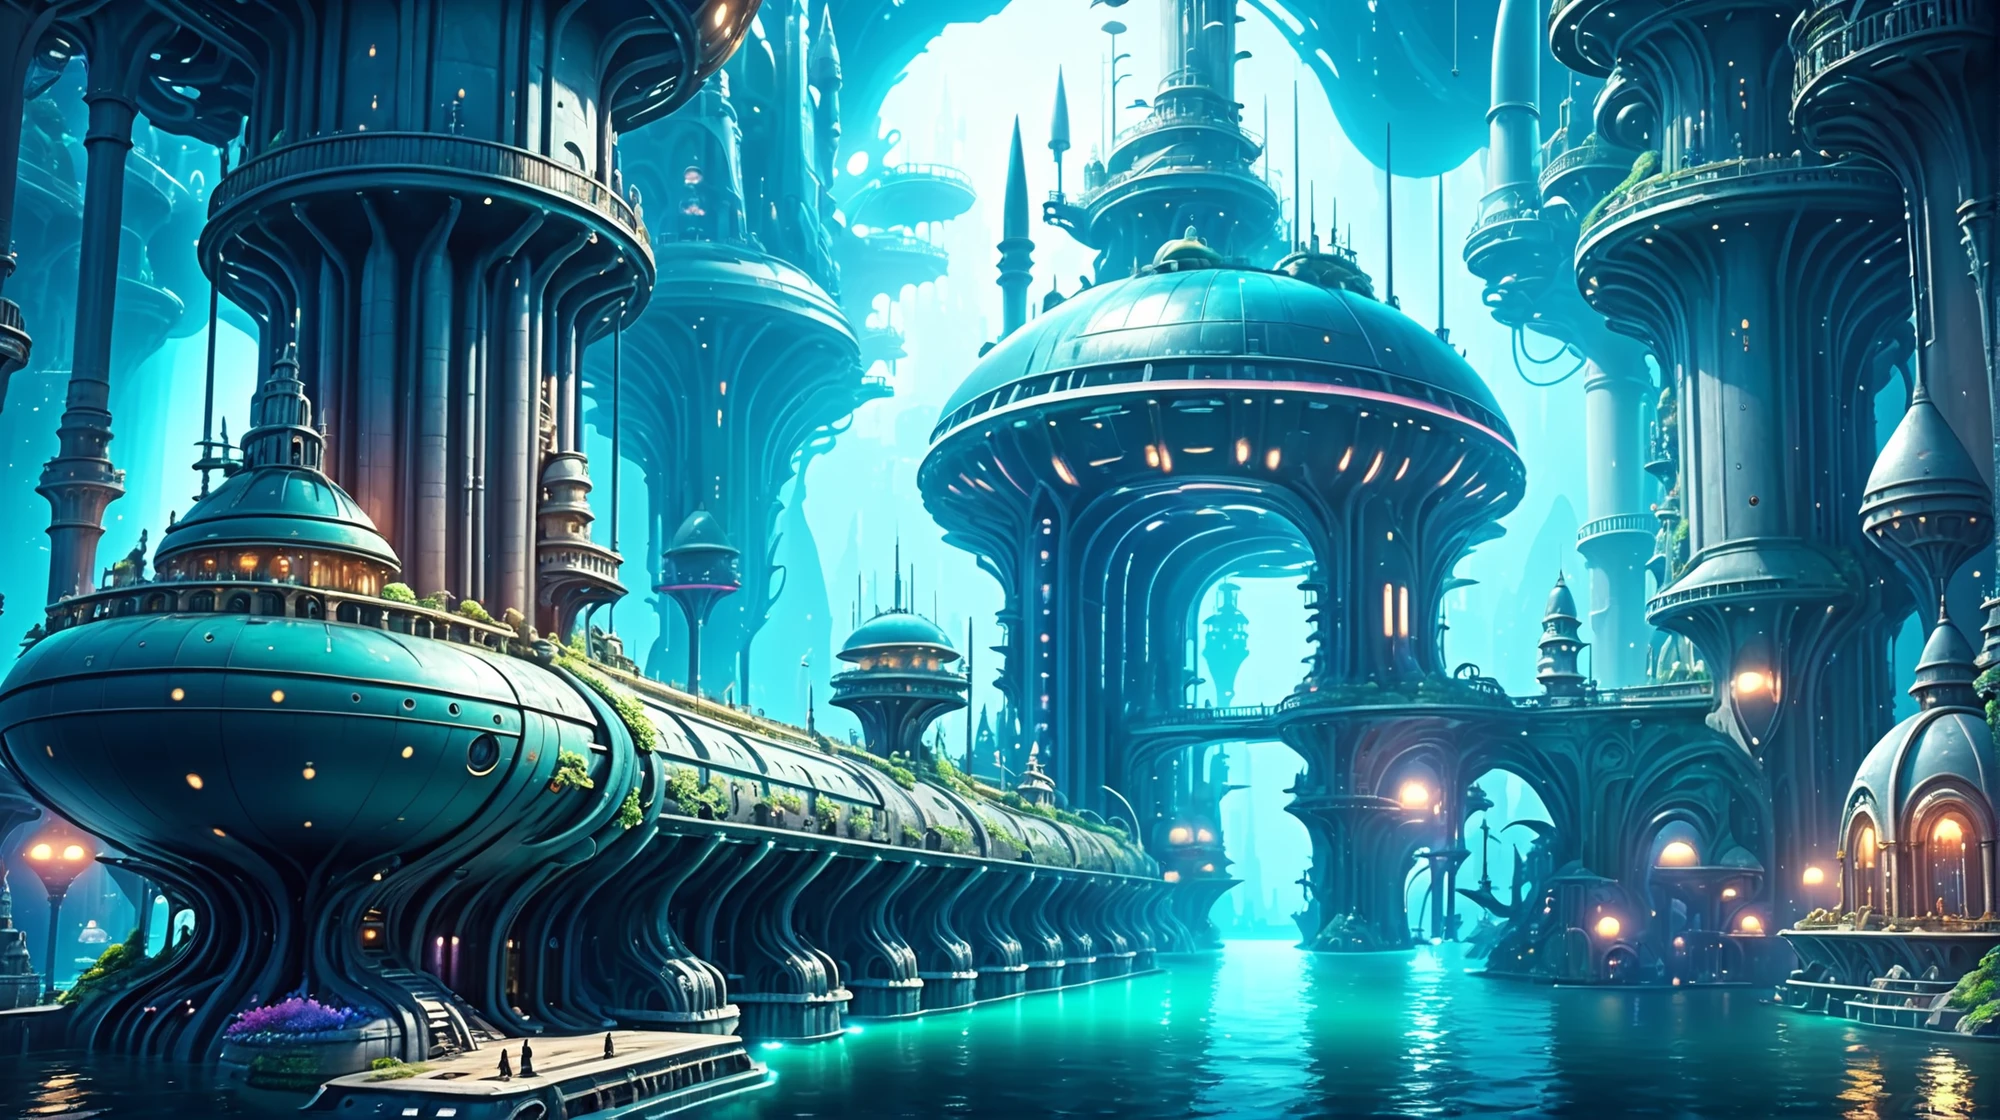 8k, highly detailed, submarine dock in a Hallowed fantasy topia beyond the beginning of reality, masterpiece